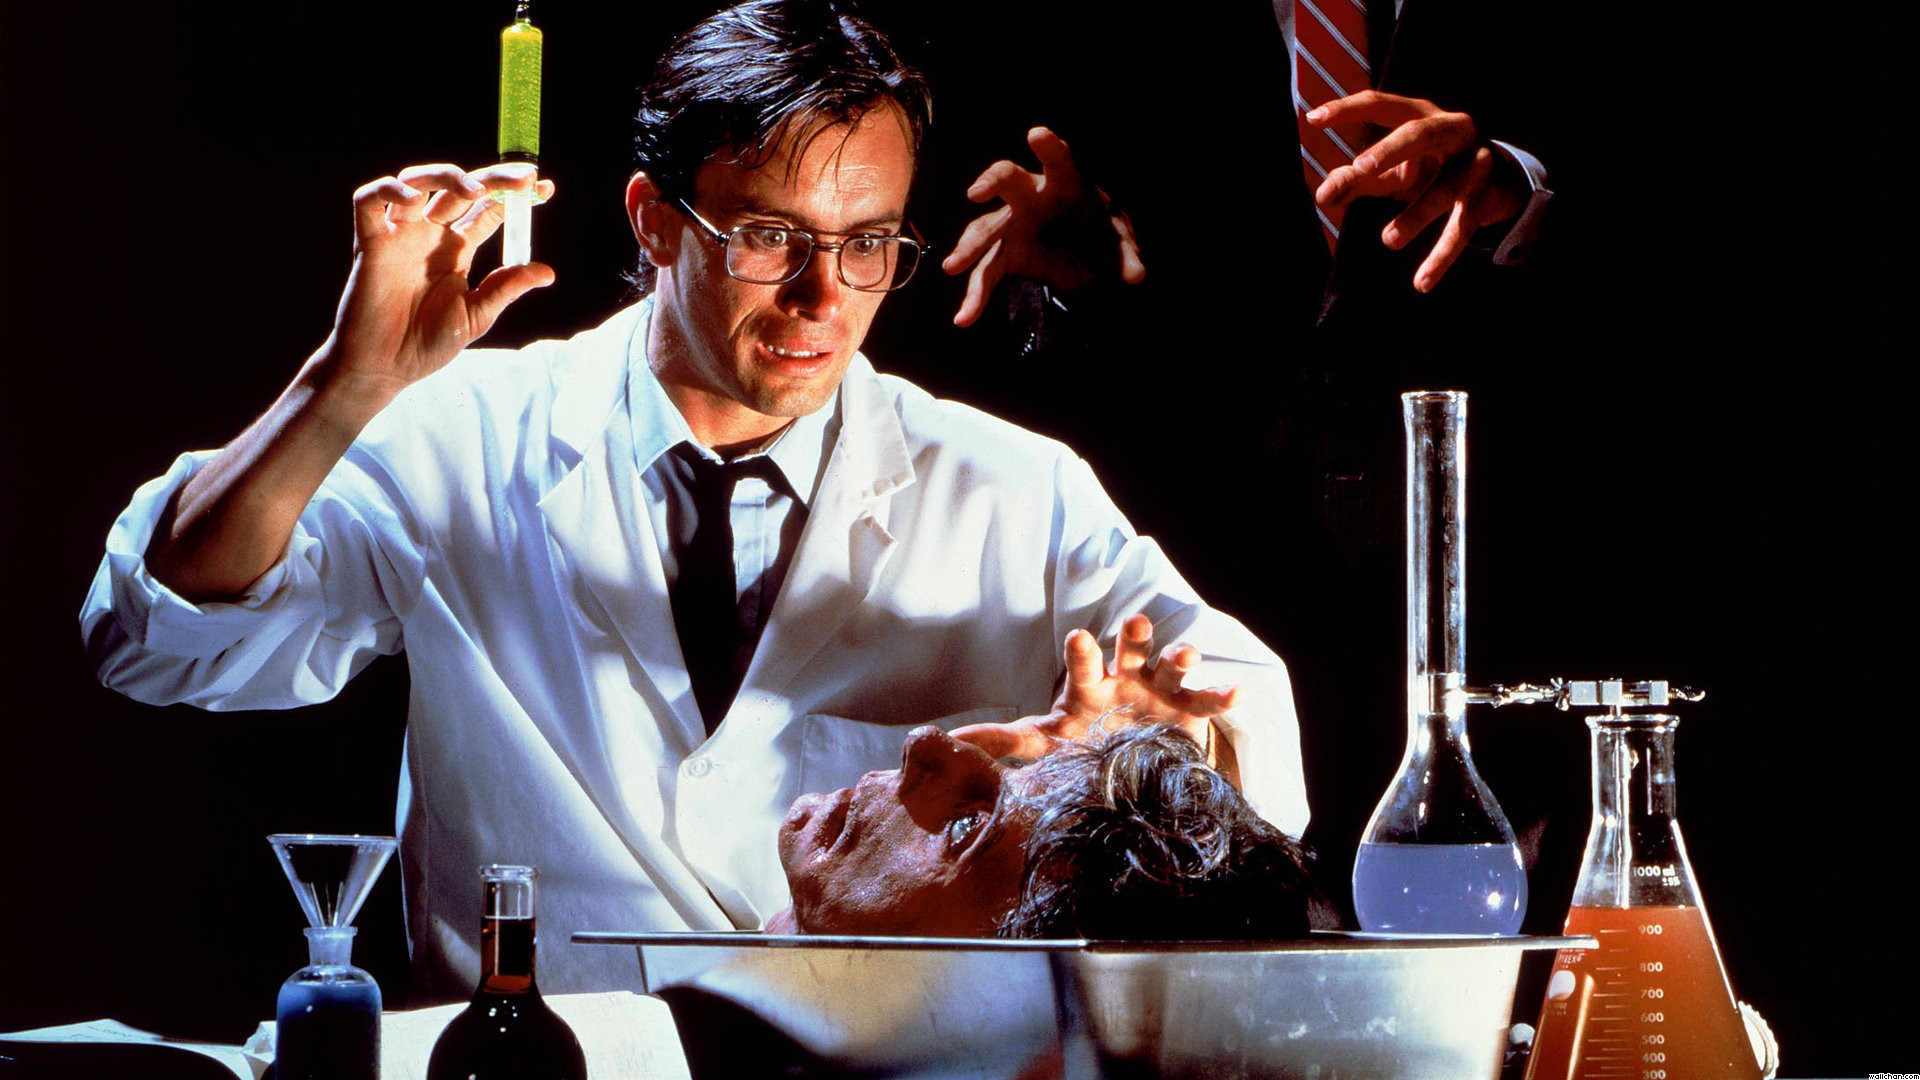 Re-Animator Backgrounds, Compatible - PC, Mobile, Gadgets| 1920x1080 px